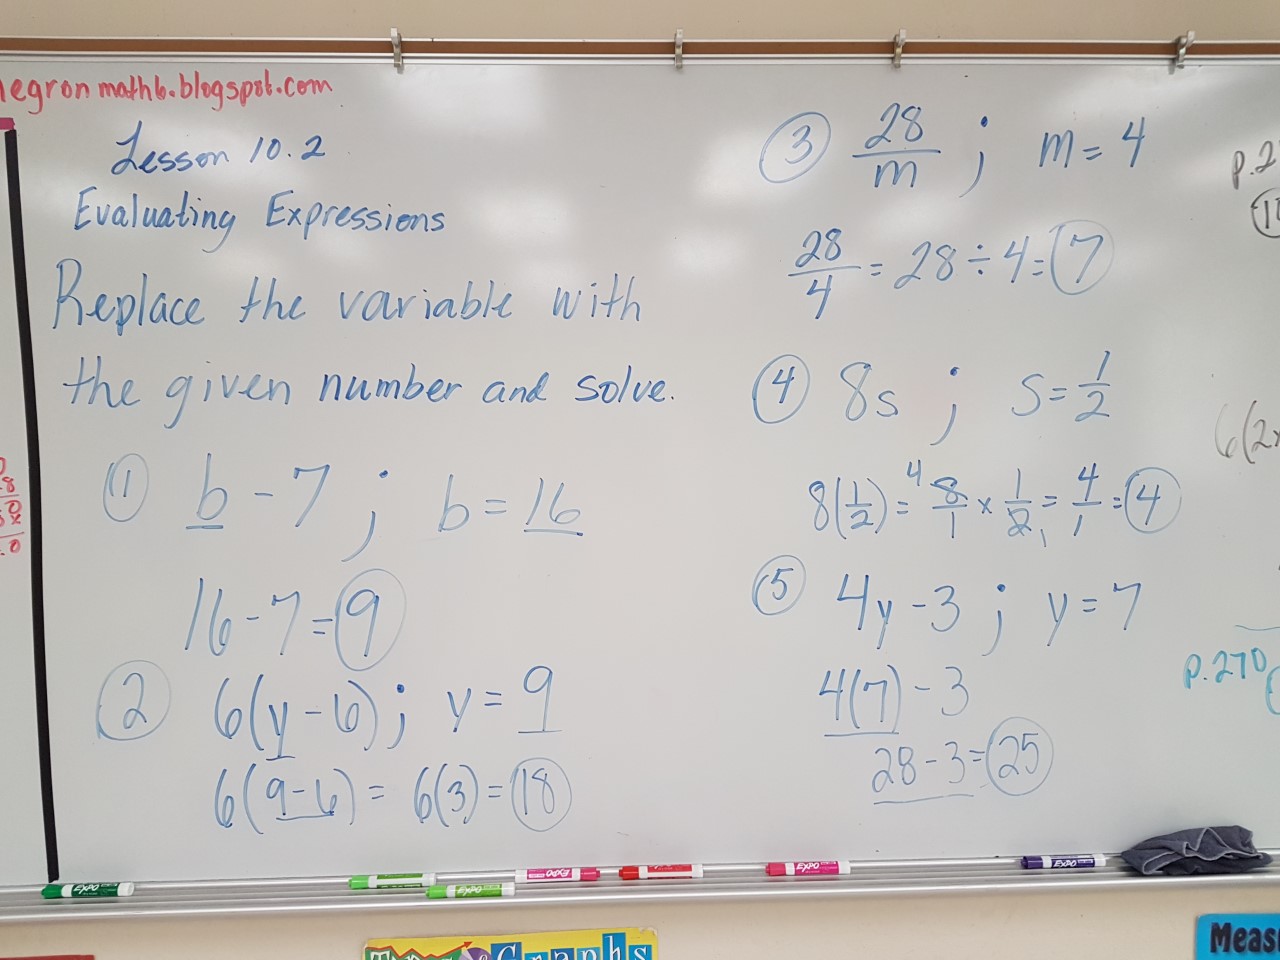 Mrs. Negron 6th Grade Math Class: Lesson 10.2 Evaluating Expressions